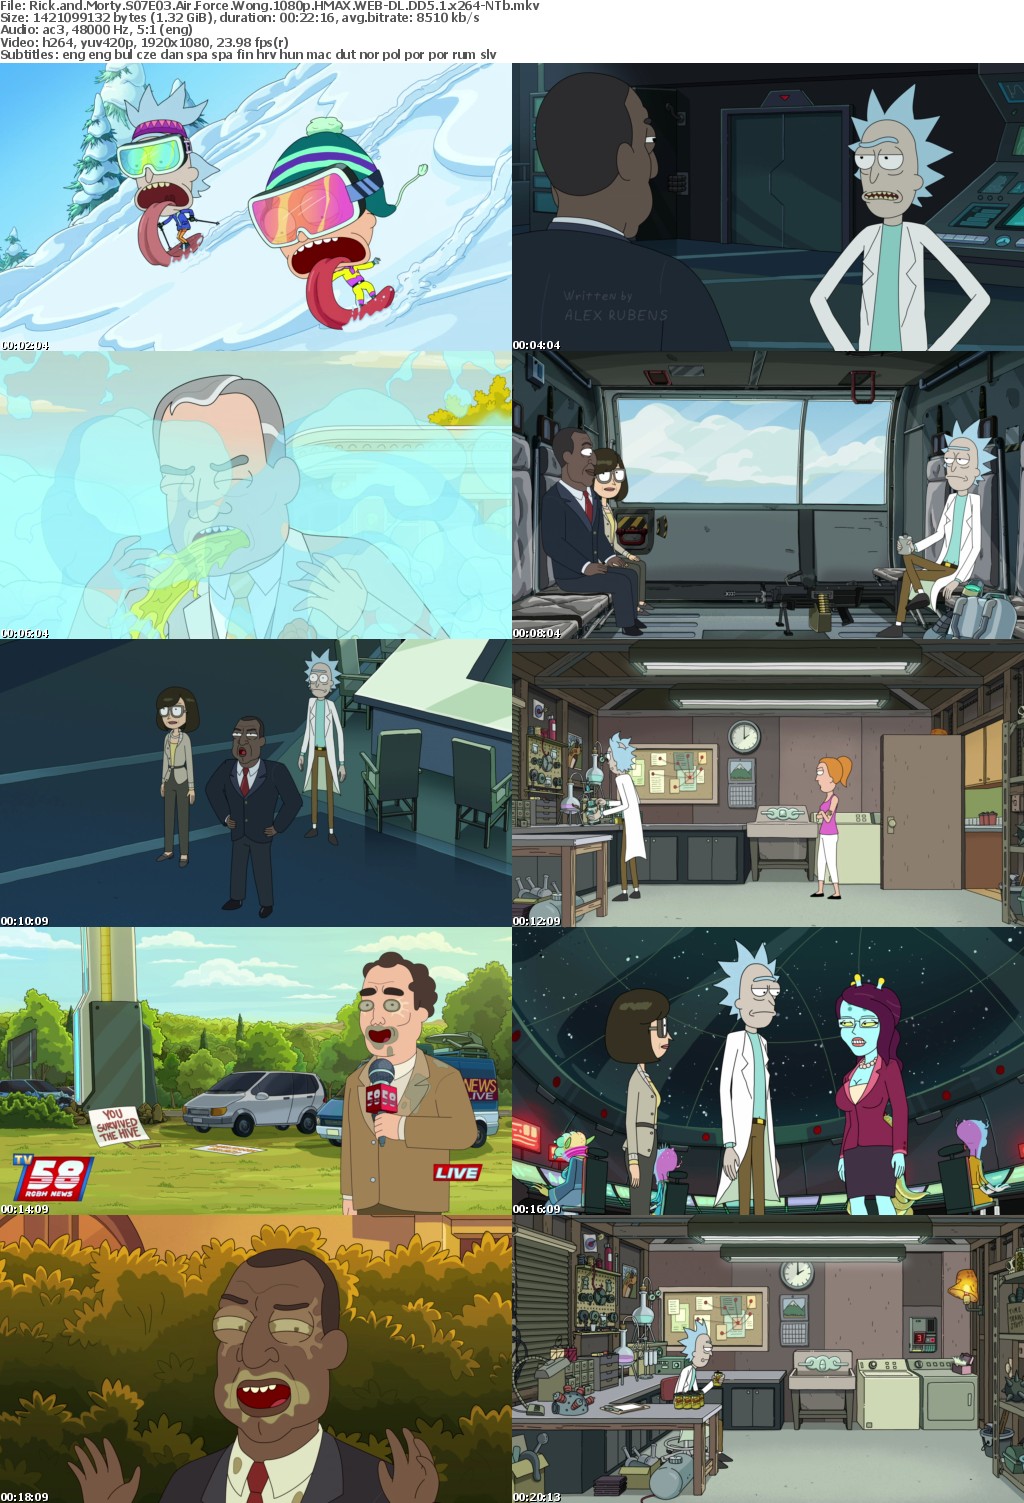 Rick and Morty S07E03 Air Force Wong 1080p HMAX WEB-DL DD5 1 x264-NTb